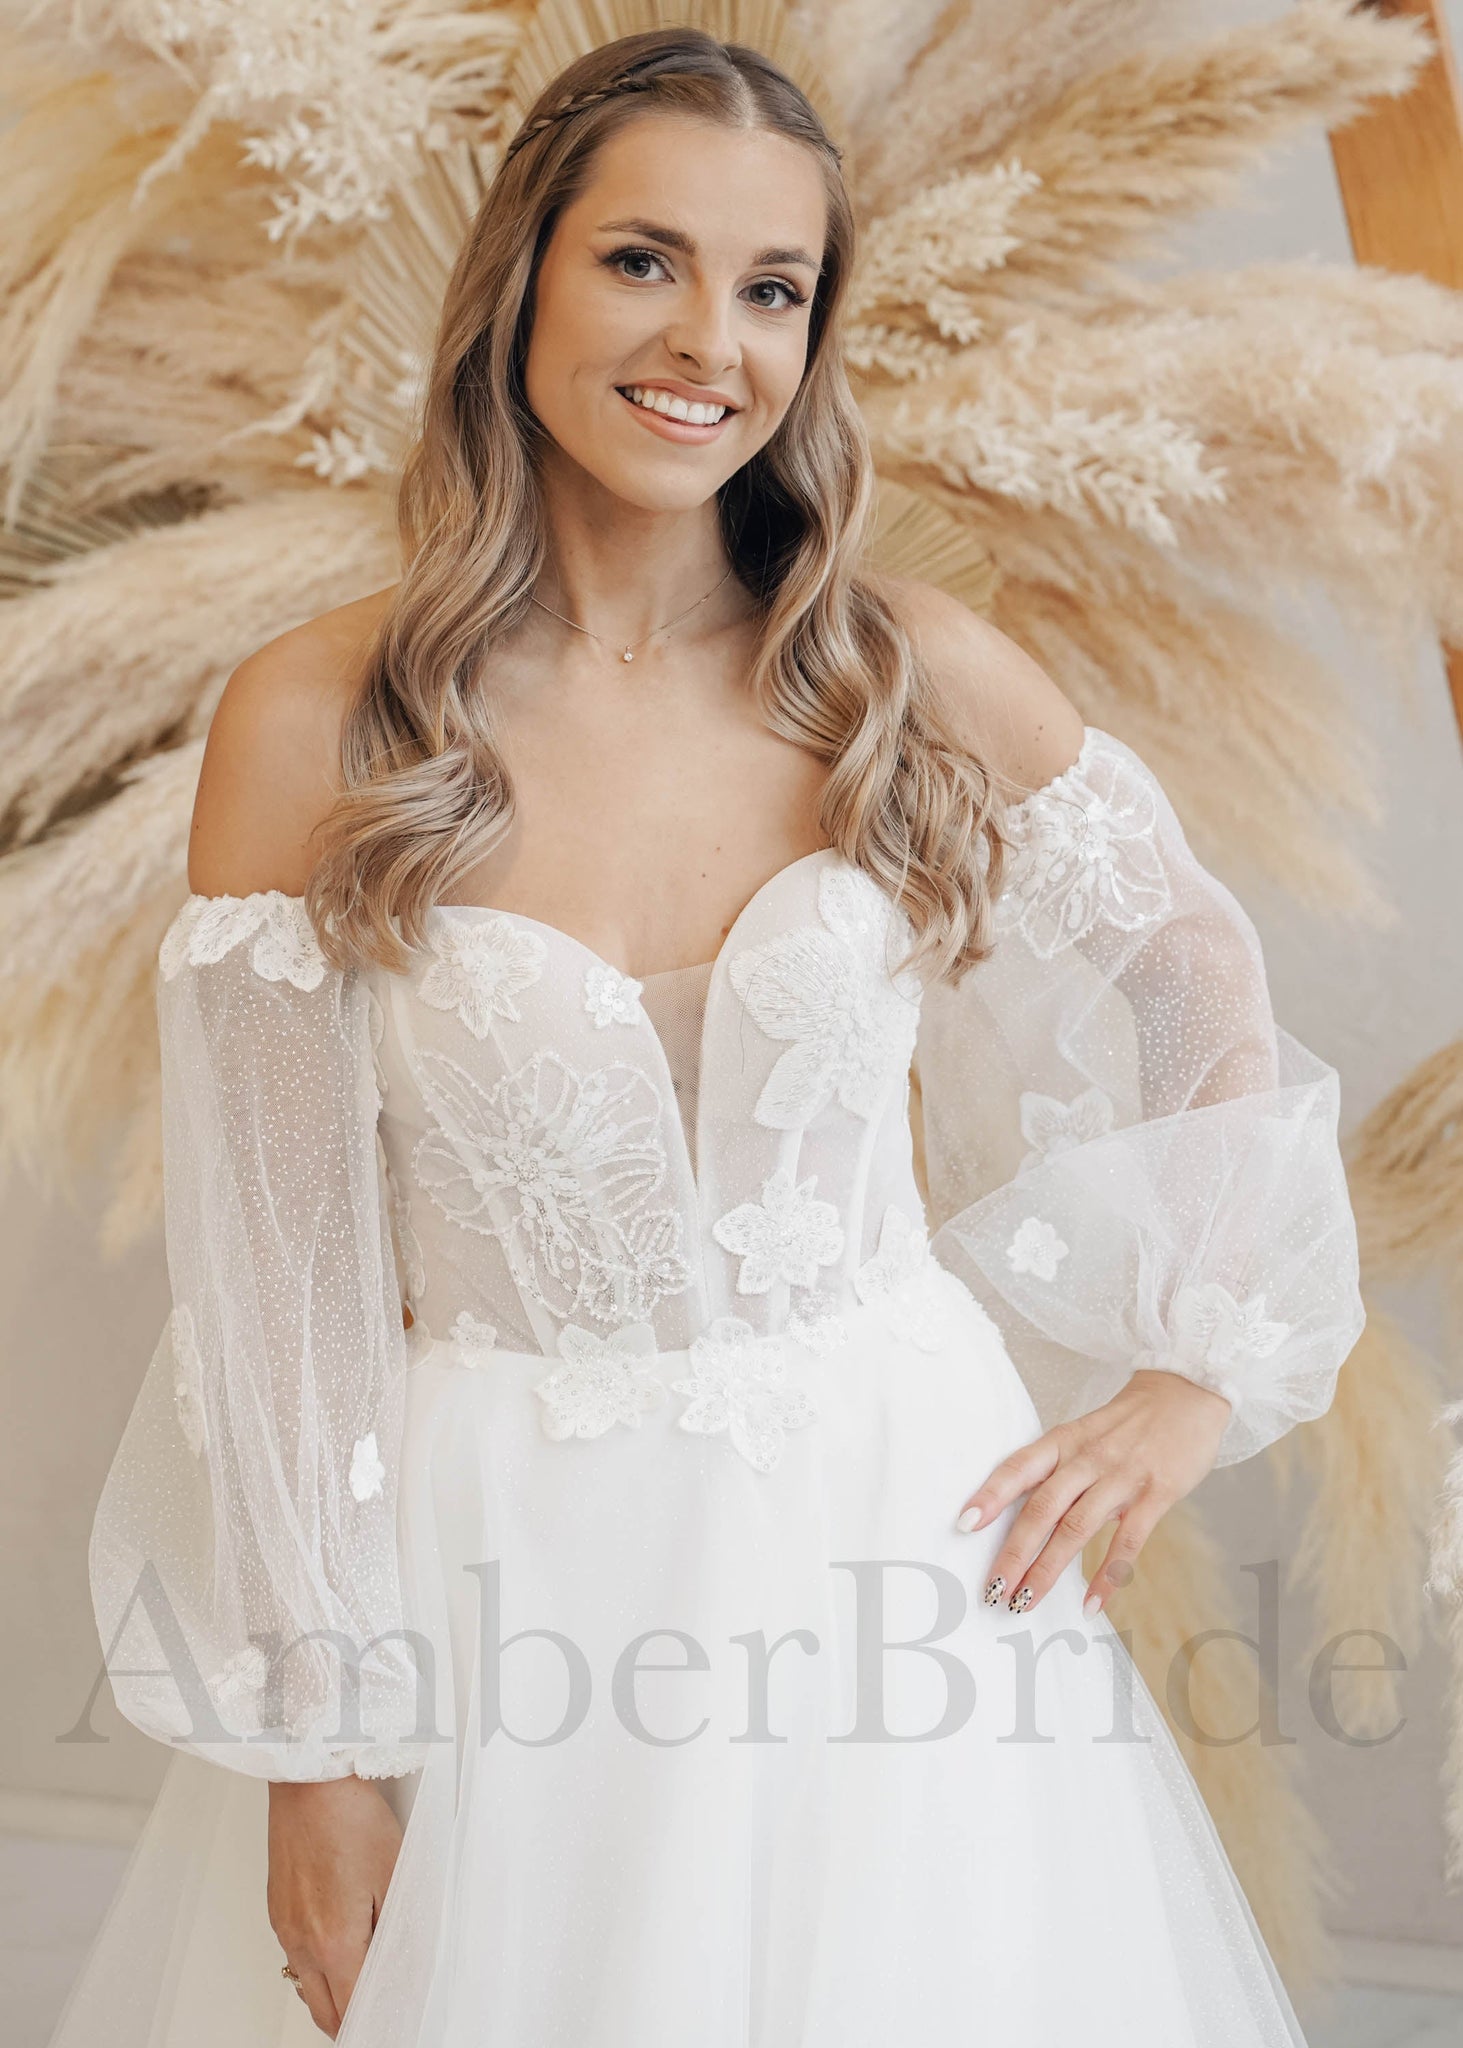 Rustic A Line Tulle Wedding Dress with Flower Appliques and Sheer Puffy Sleeves